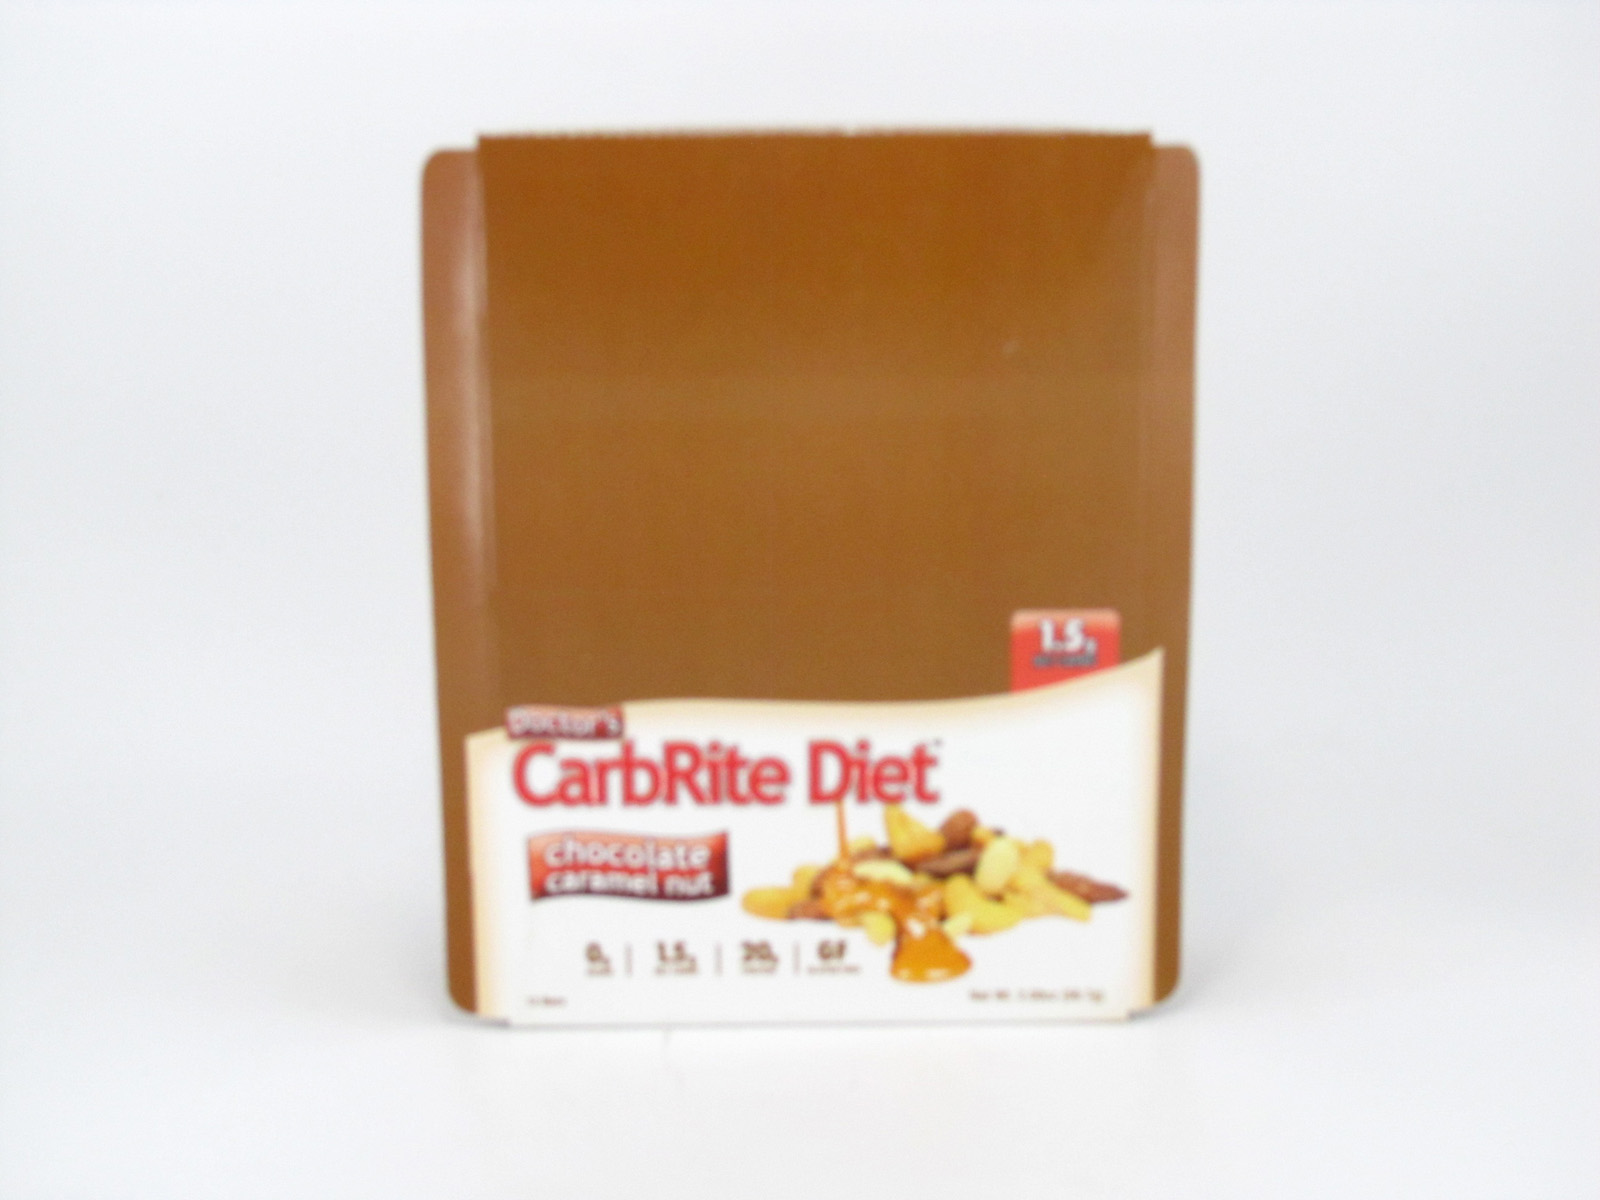 Doctor's CarbRite Diet - Chocolate Caramel Nut - Box view